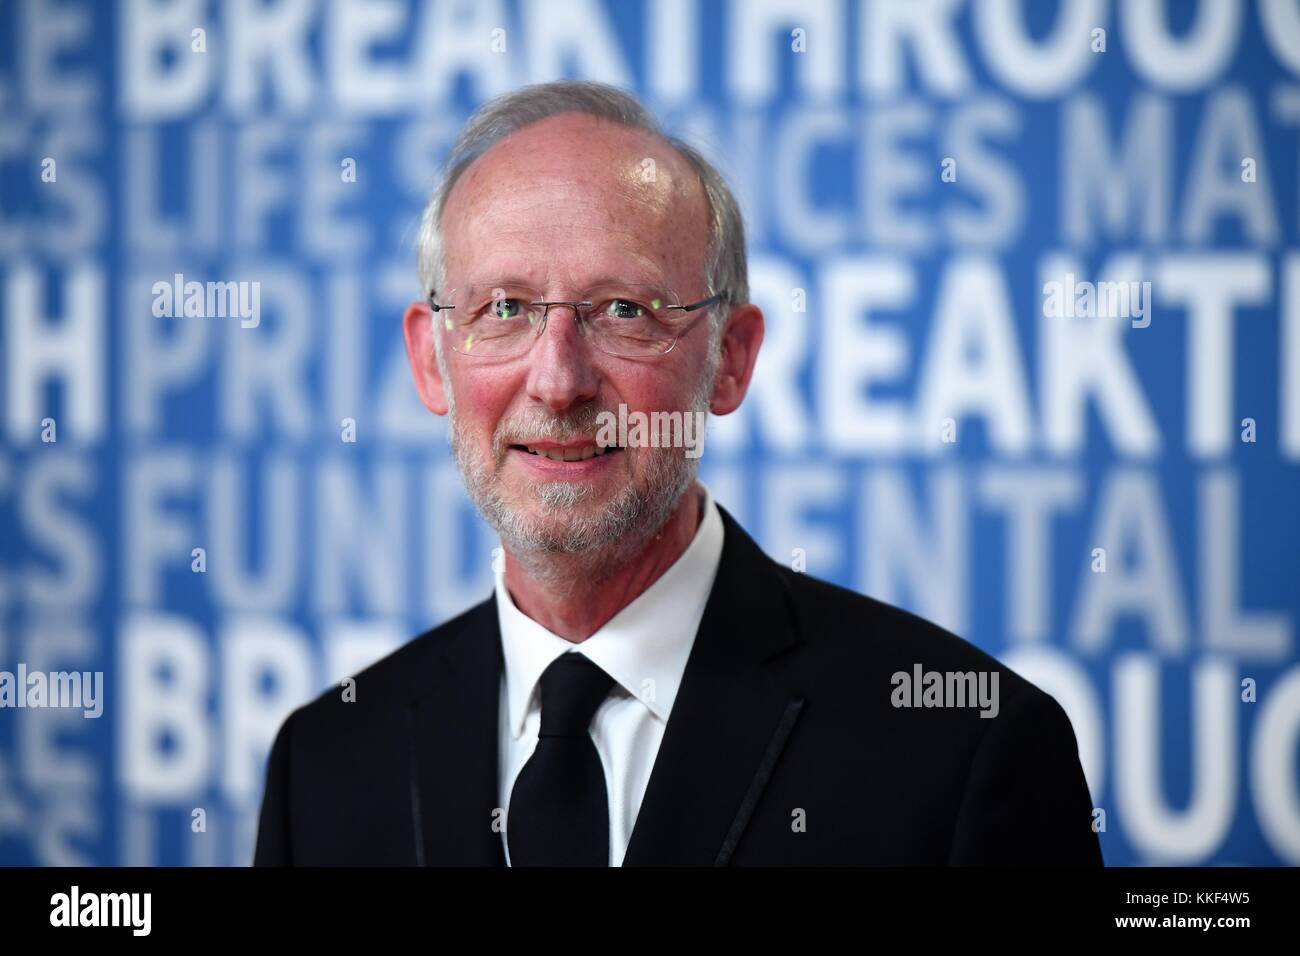 (171204) -- SAN FRANCISCO, Dec. 4, 2017 (Xinhua) -- Don W. Cleveland from the Ludwig Institute for Cancer Research at the University of California, San Diego attends the awarding ceremony of the 2018 Breakthrough Prize in San Francisco, the United States, on Dec. 3, 2017. The Breakthrough Prize Foundation on Sunday announced here the winners of the 2018 Breakthrough Prizes in fundamental physics, life sciences and mathematics, together with several other prizes to encourage young scientists. The prize in life sciences went to Joanne Chory from the Salk Institute for Biological Studies and Howa Stock Photo